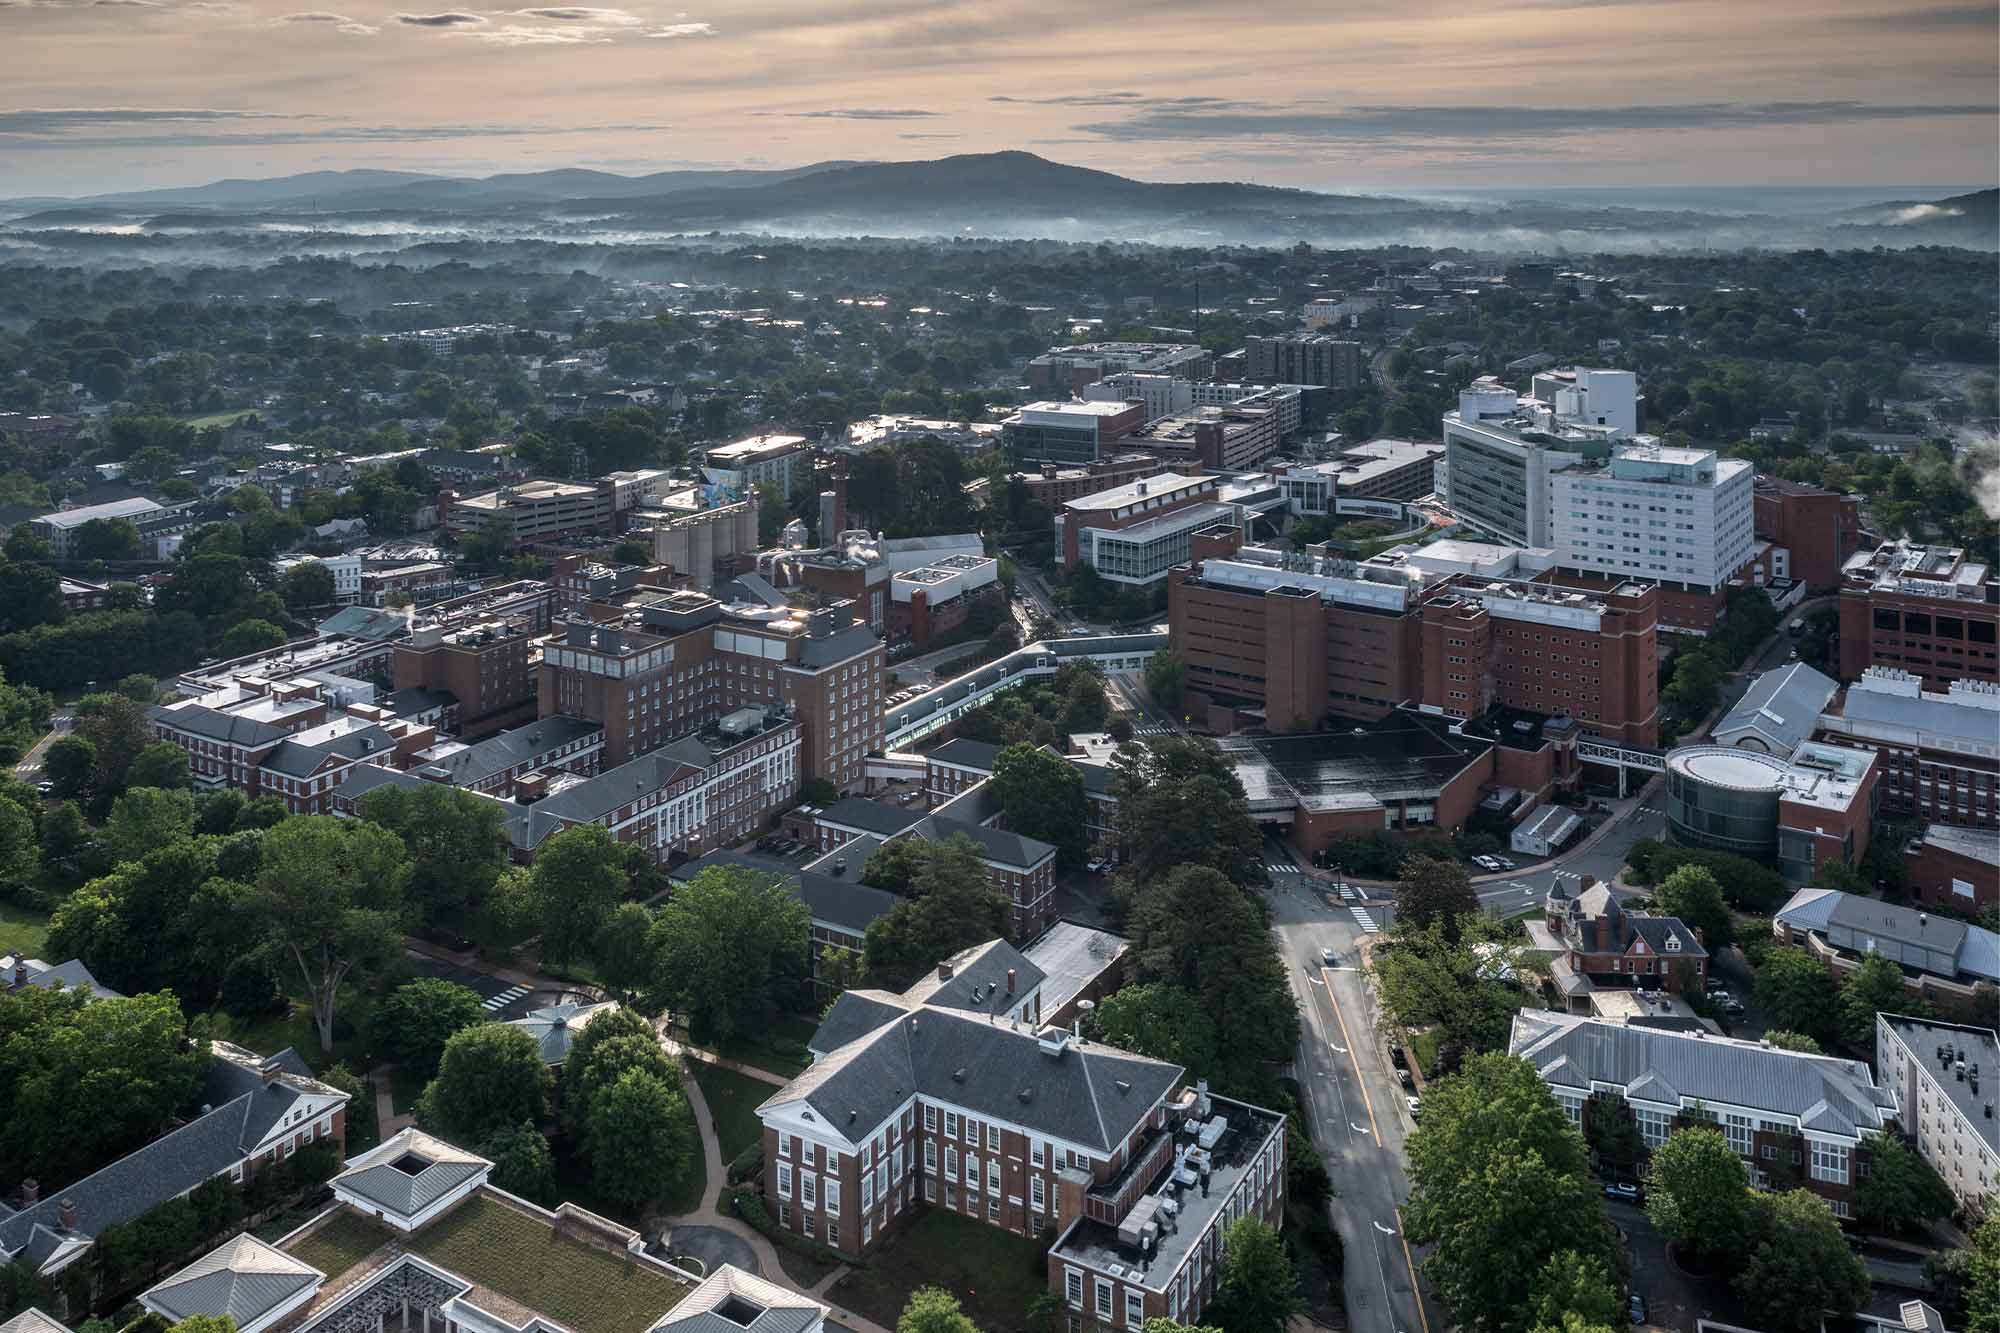 Aerial view of the UVA Health system at sunset